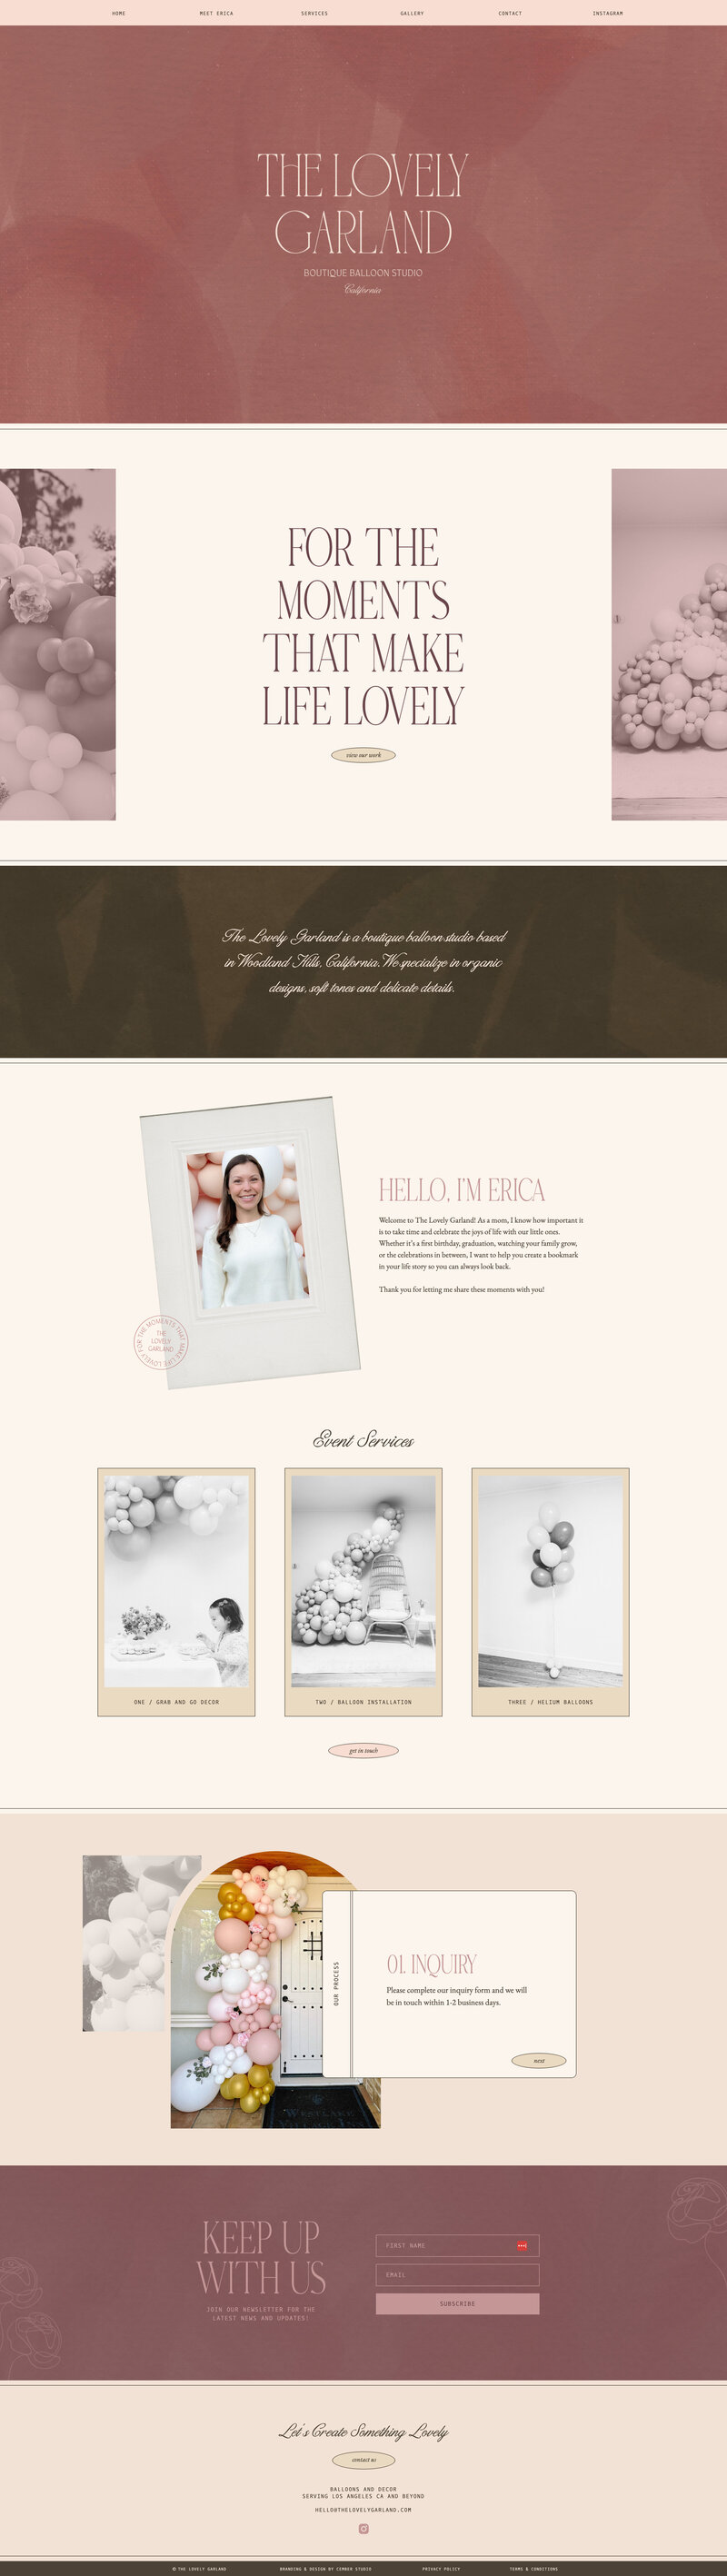 Showit website mockup of The Lovely Garland boutique balloon studio